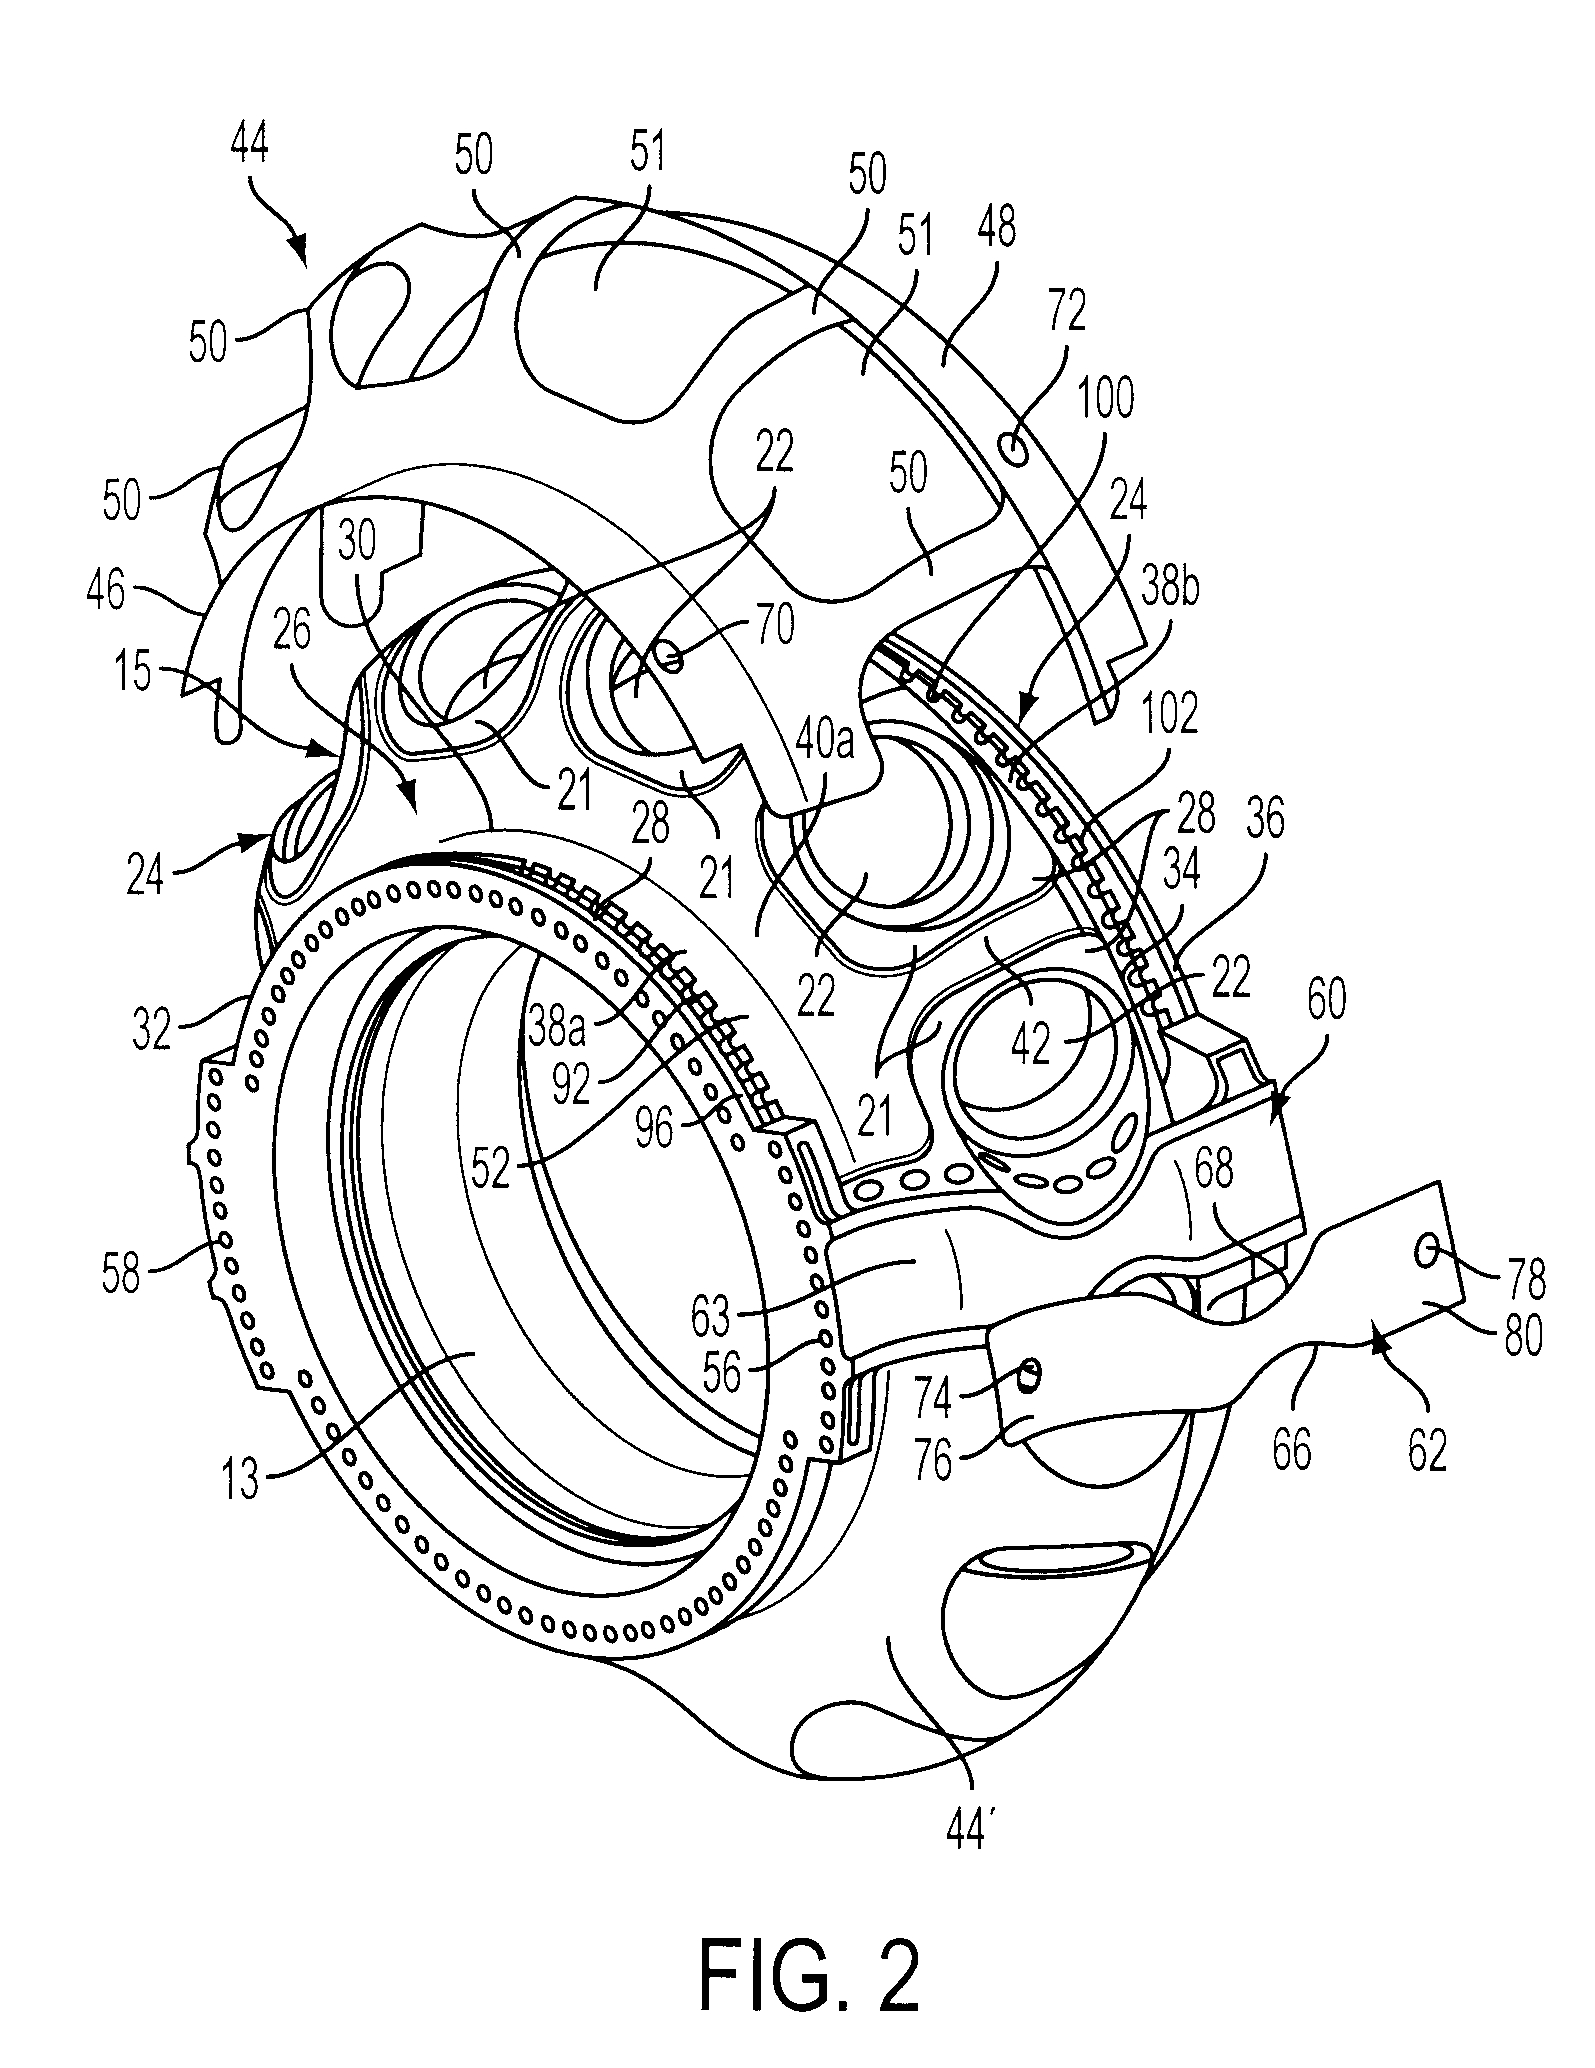 Cooling structure for outer surface of a gas turbine case